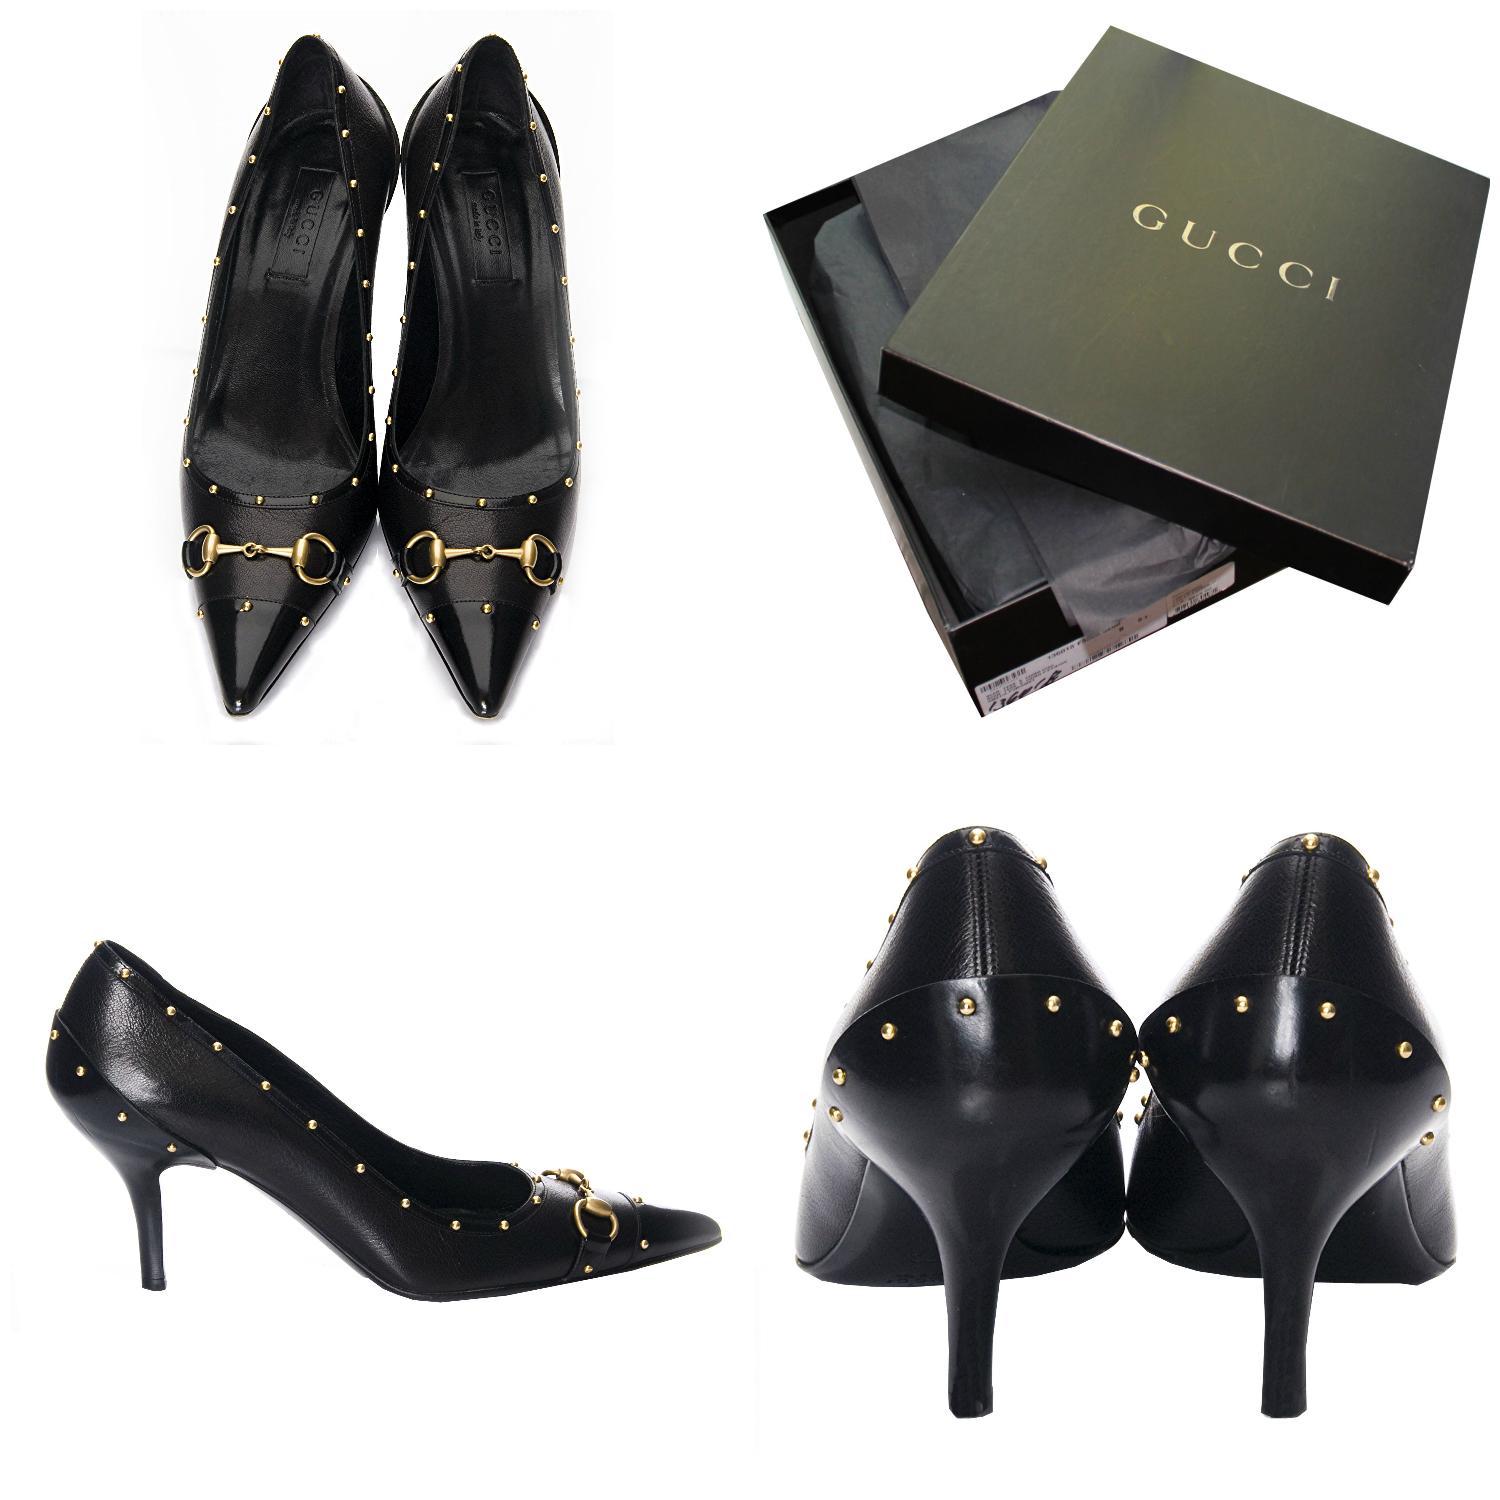 Rare Tom Ford for Gucci
Uppers in Mint Condition Worn Once
Minor Scuffs to soles only
* Stunning Horsebit Pumps
* Euro Size: 37
* Black Leather
* Gold Horsebit Hardware
* Gold Bullets
* Leather Footbed
* 3.25